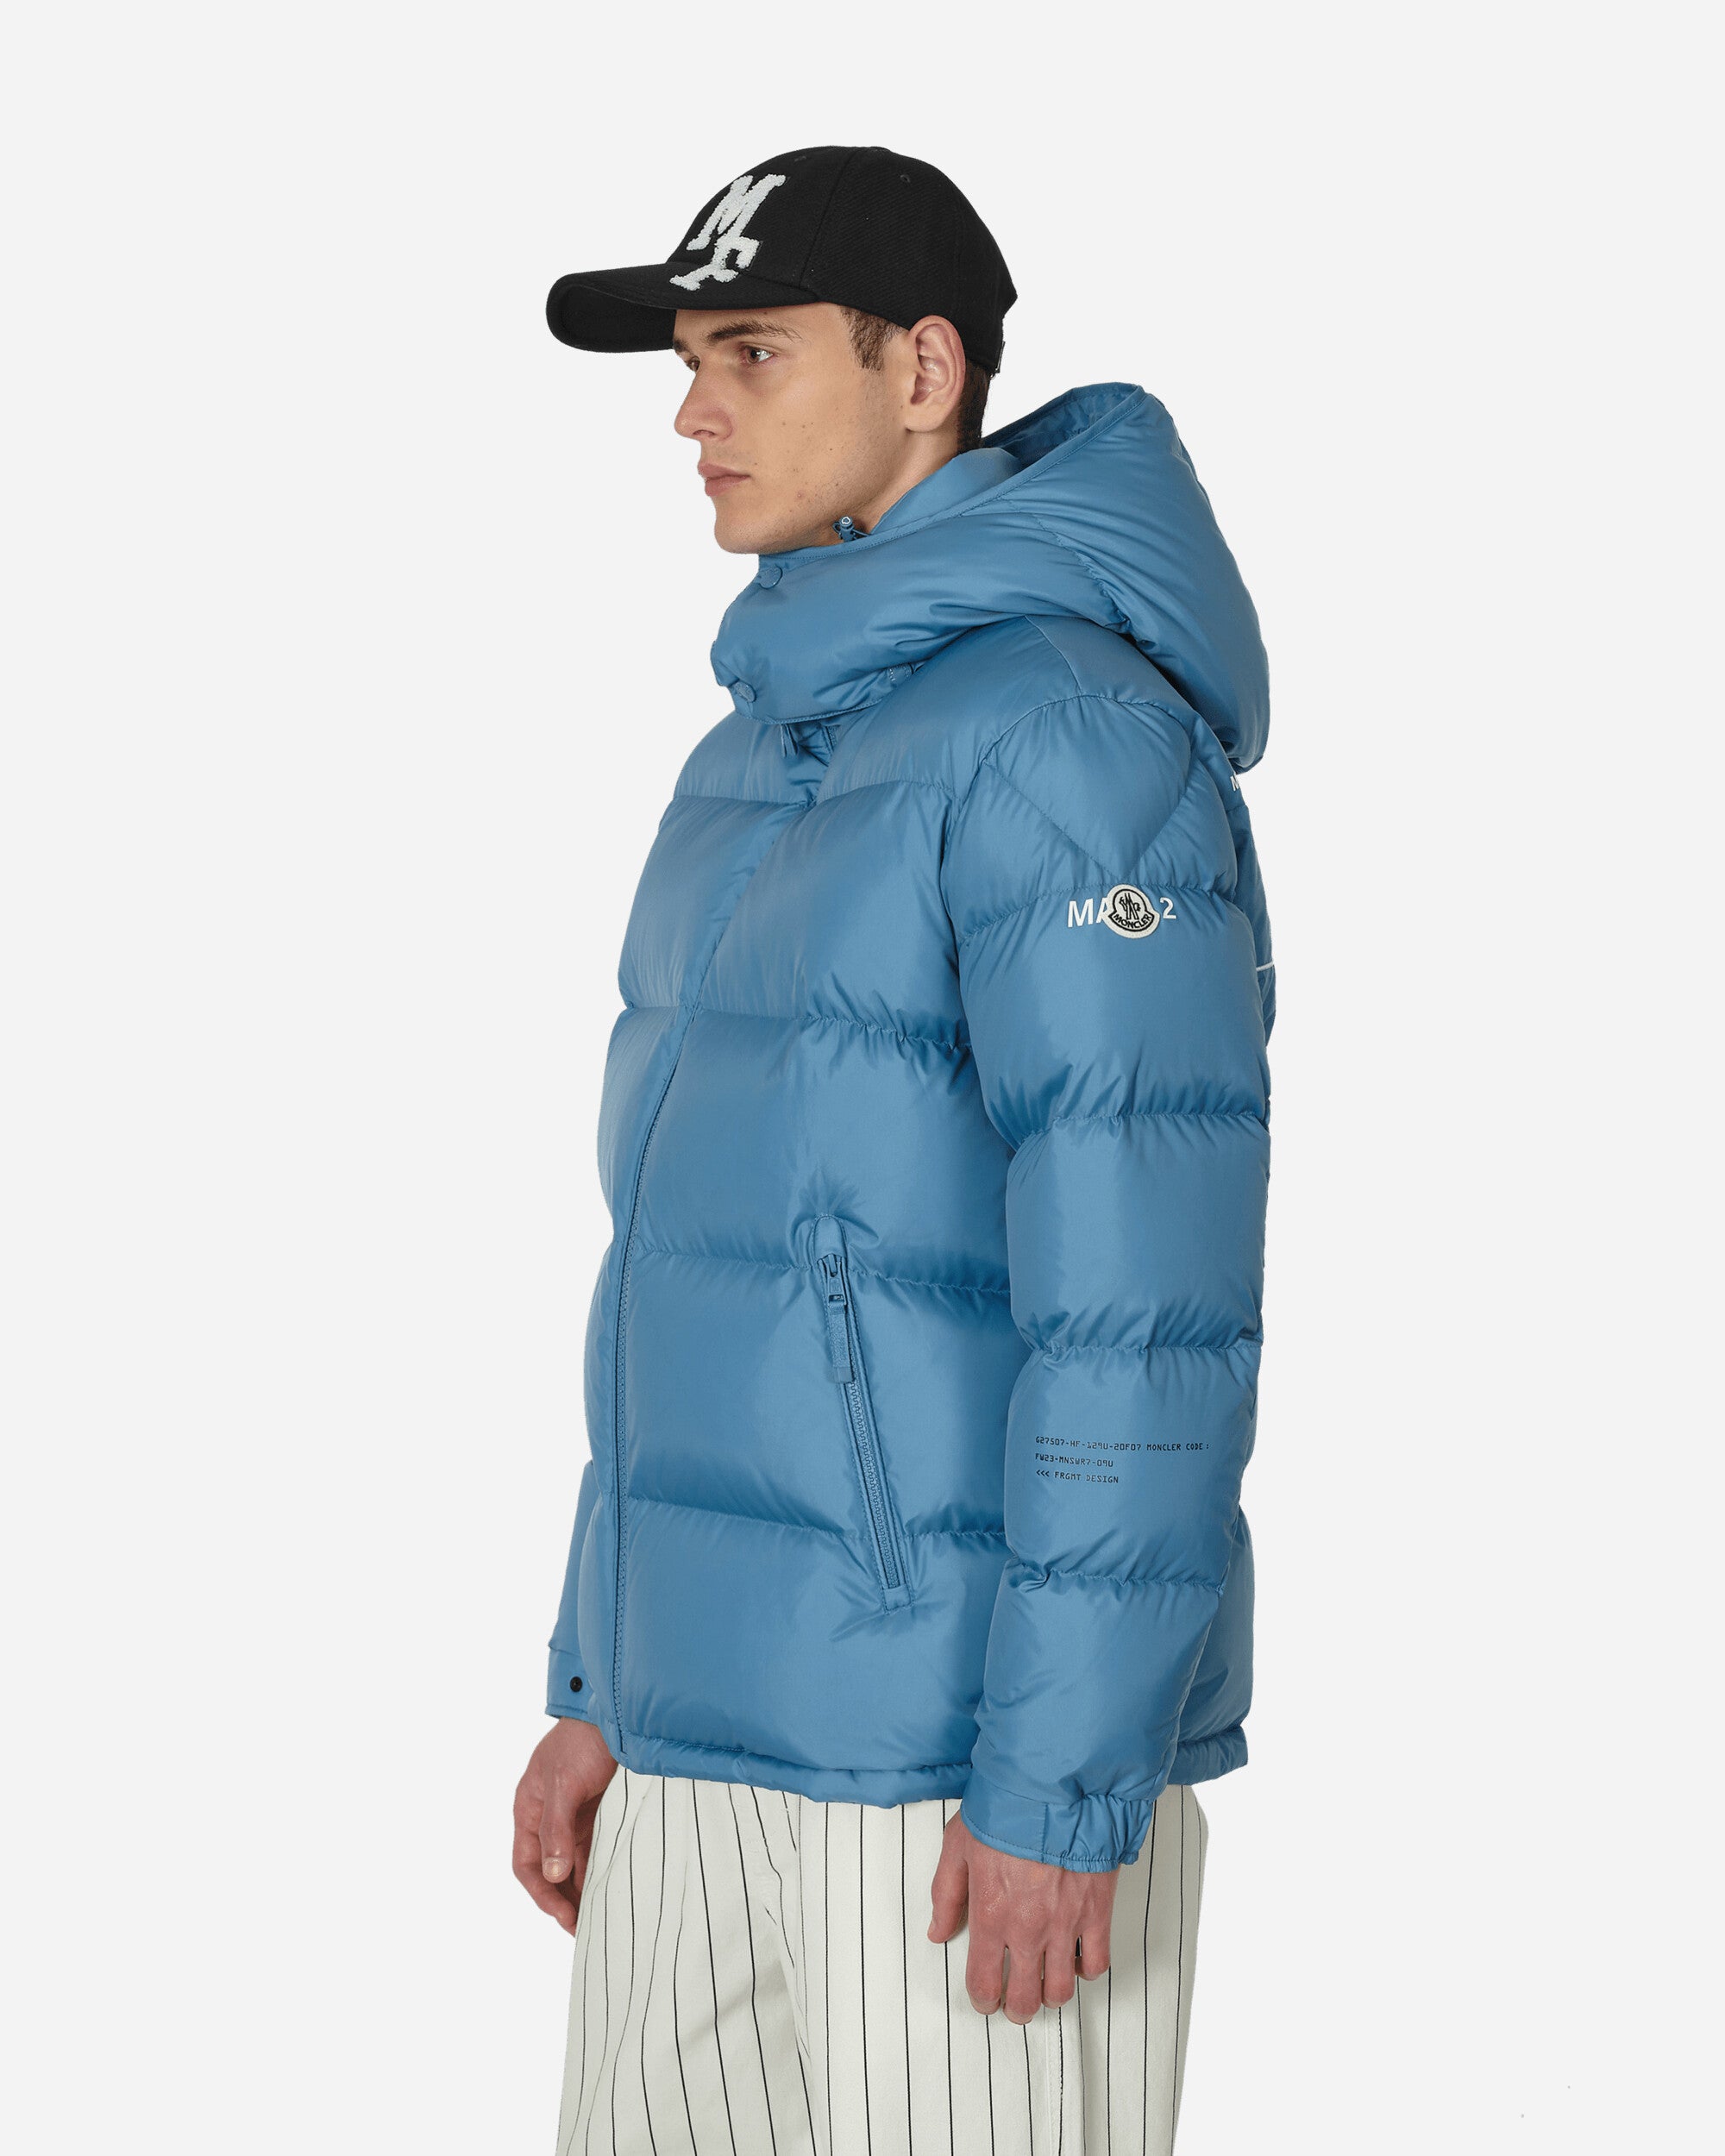 Moncler Genius Acanthus Jacket X Fragment Blue Coats and Jackets Down Jackets 1A00001M3235 70H